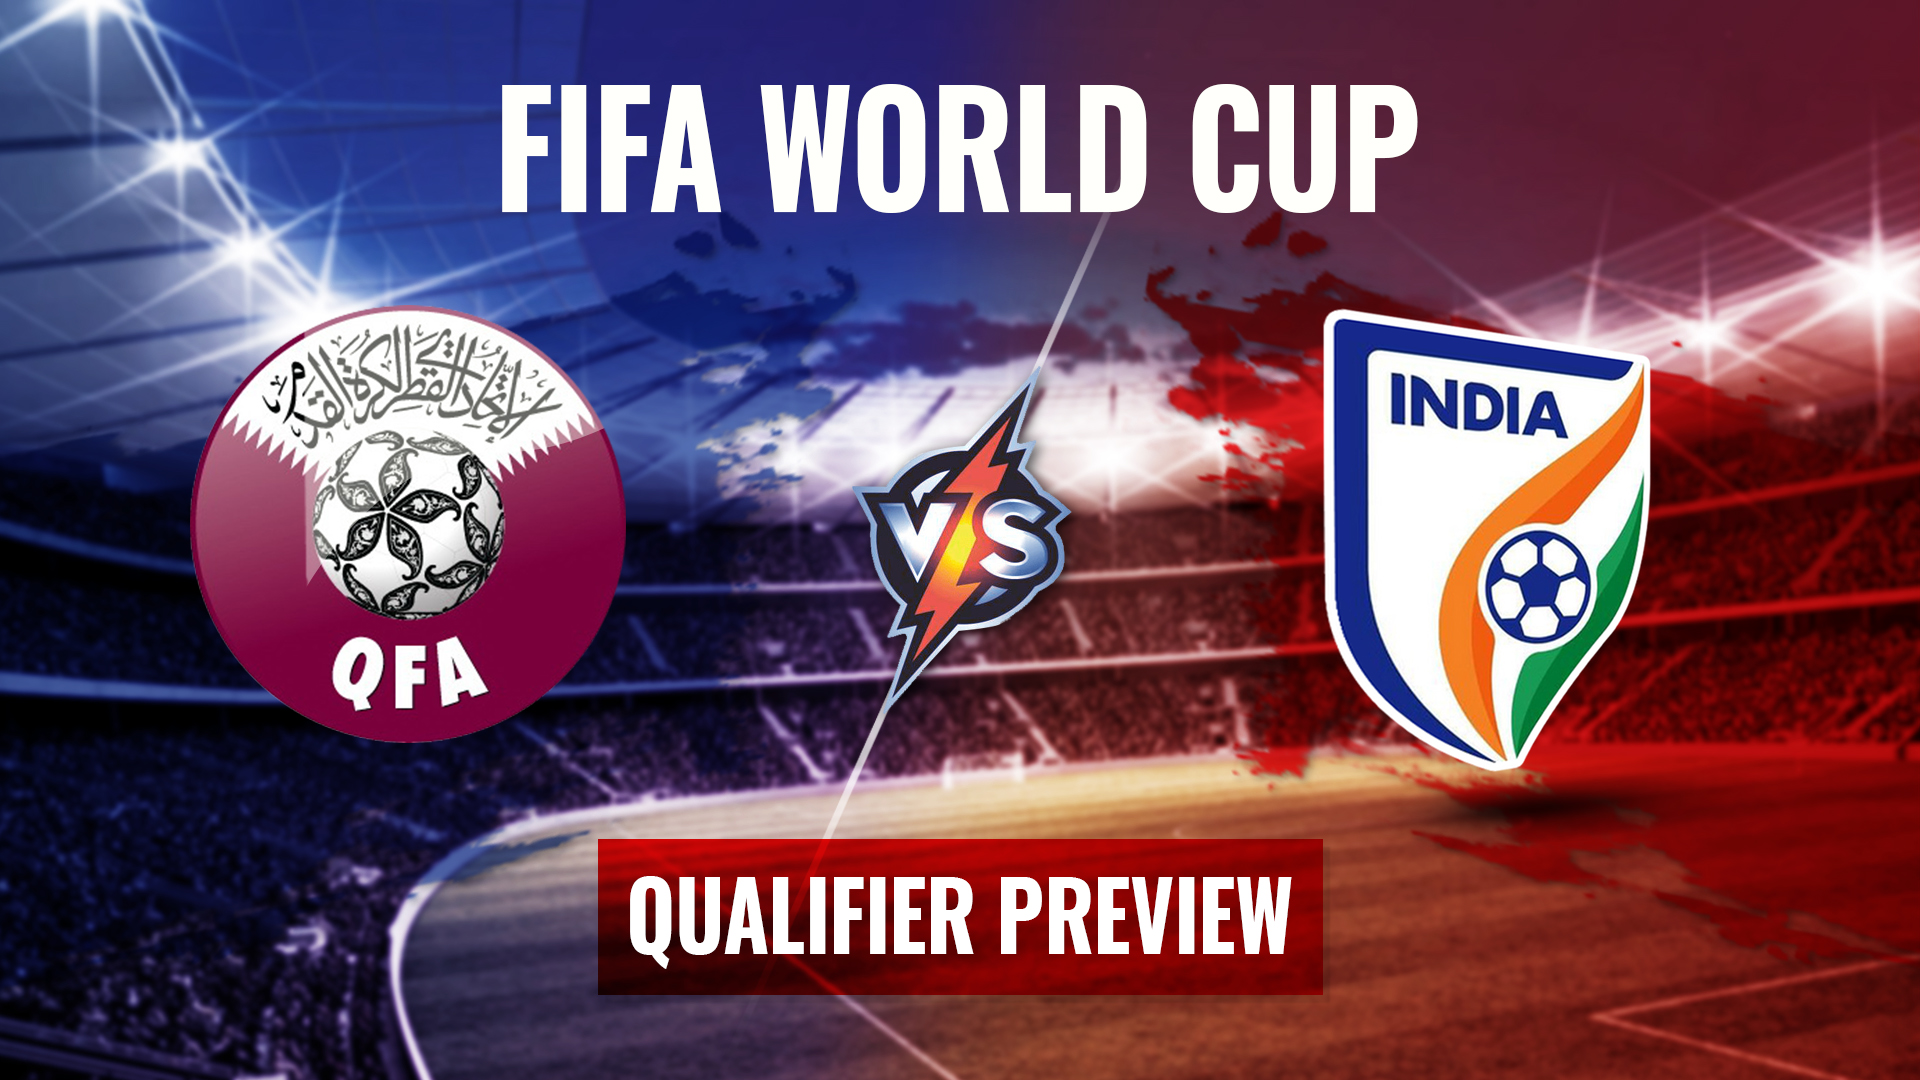 Qatar vs India Preview and Tactical Analysis with Qatar Expert John